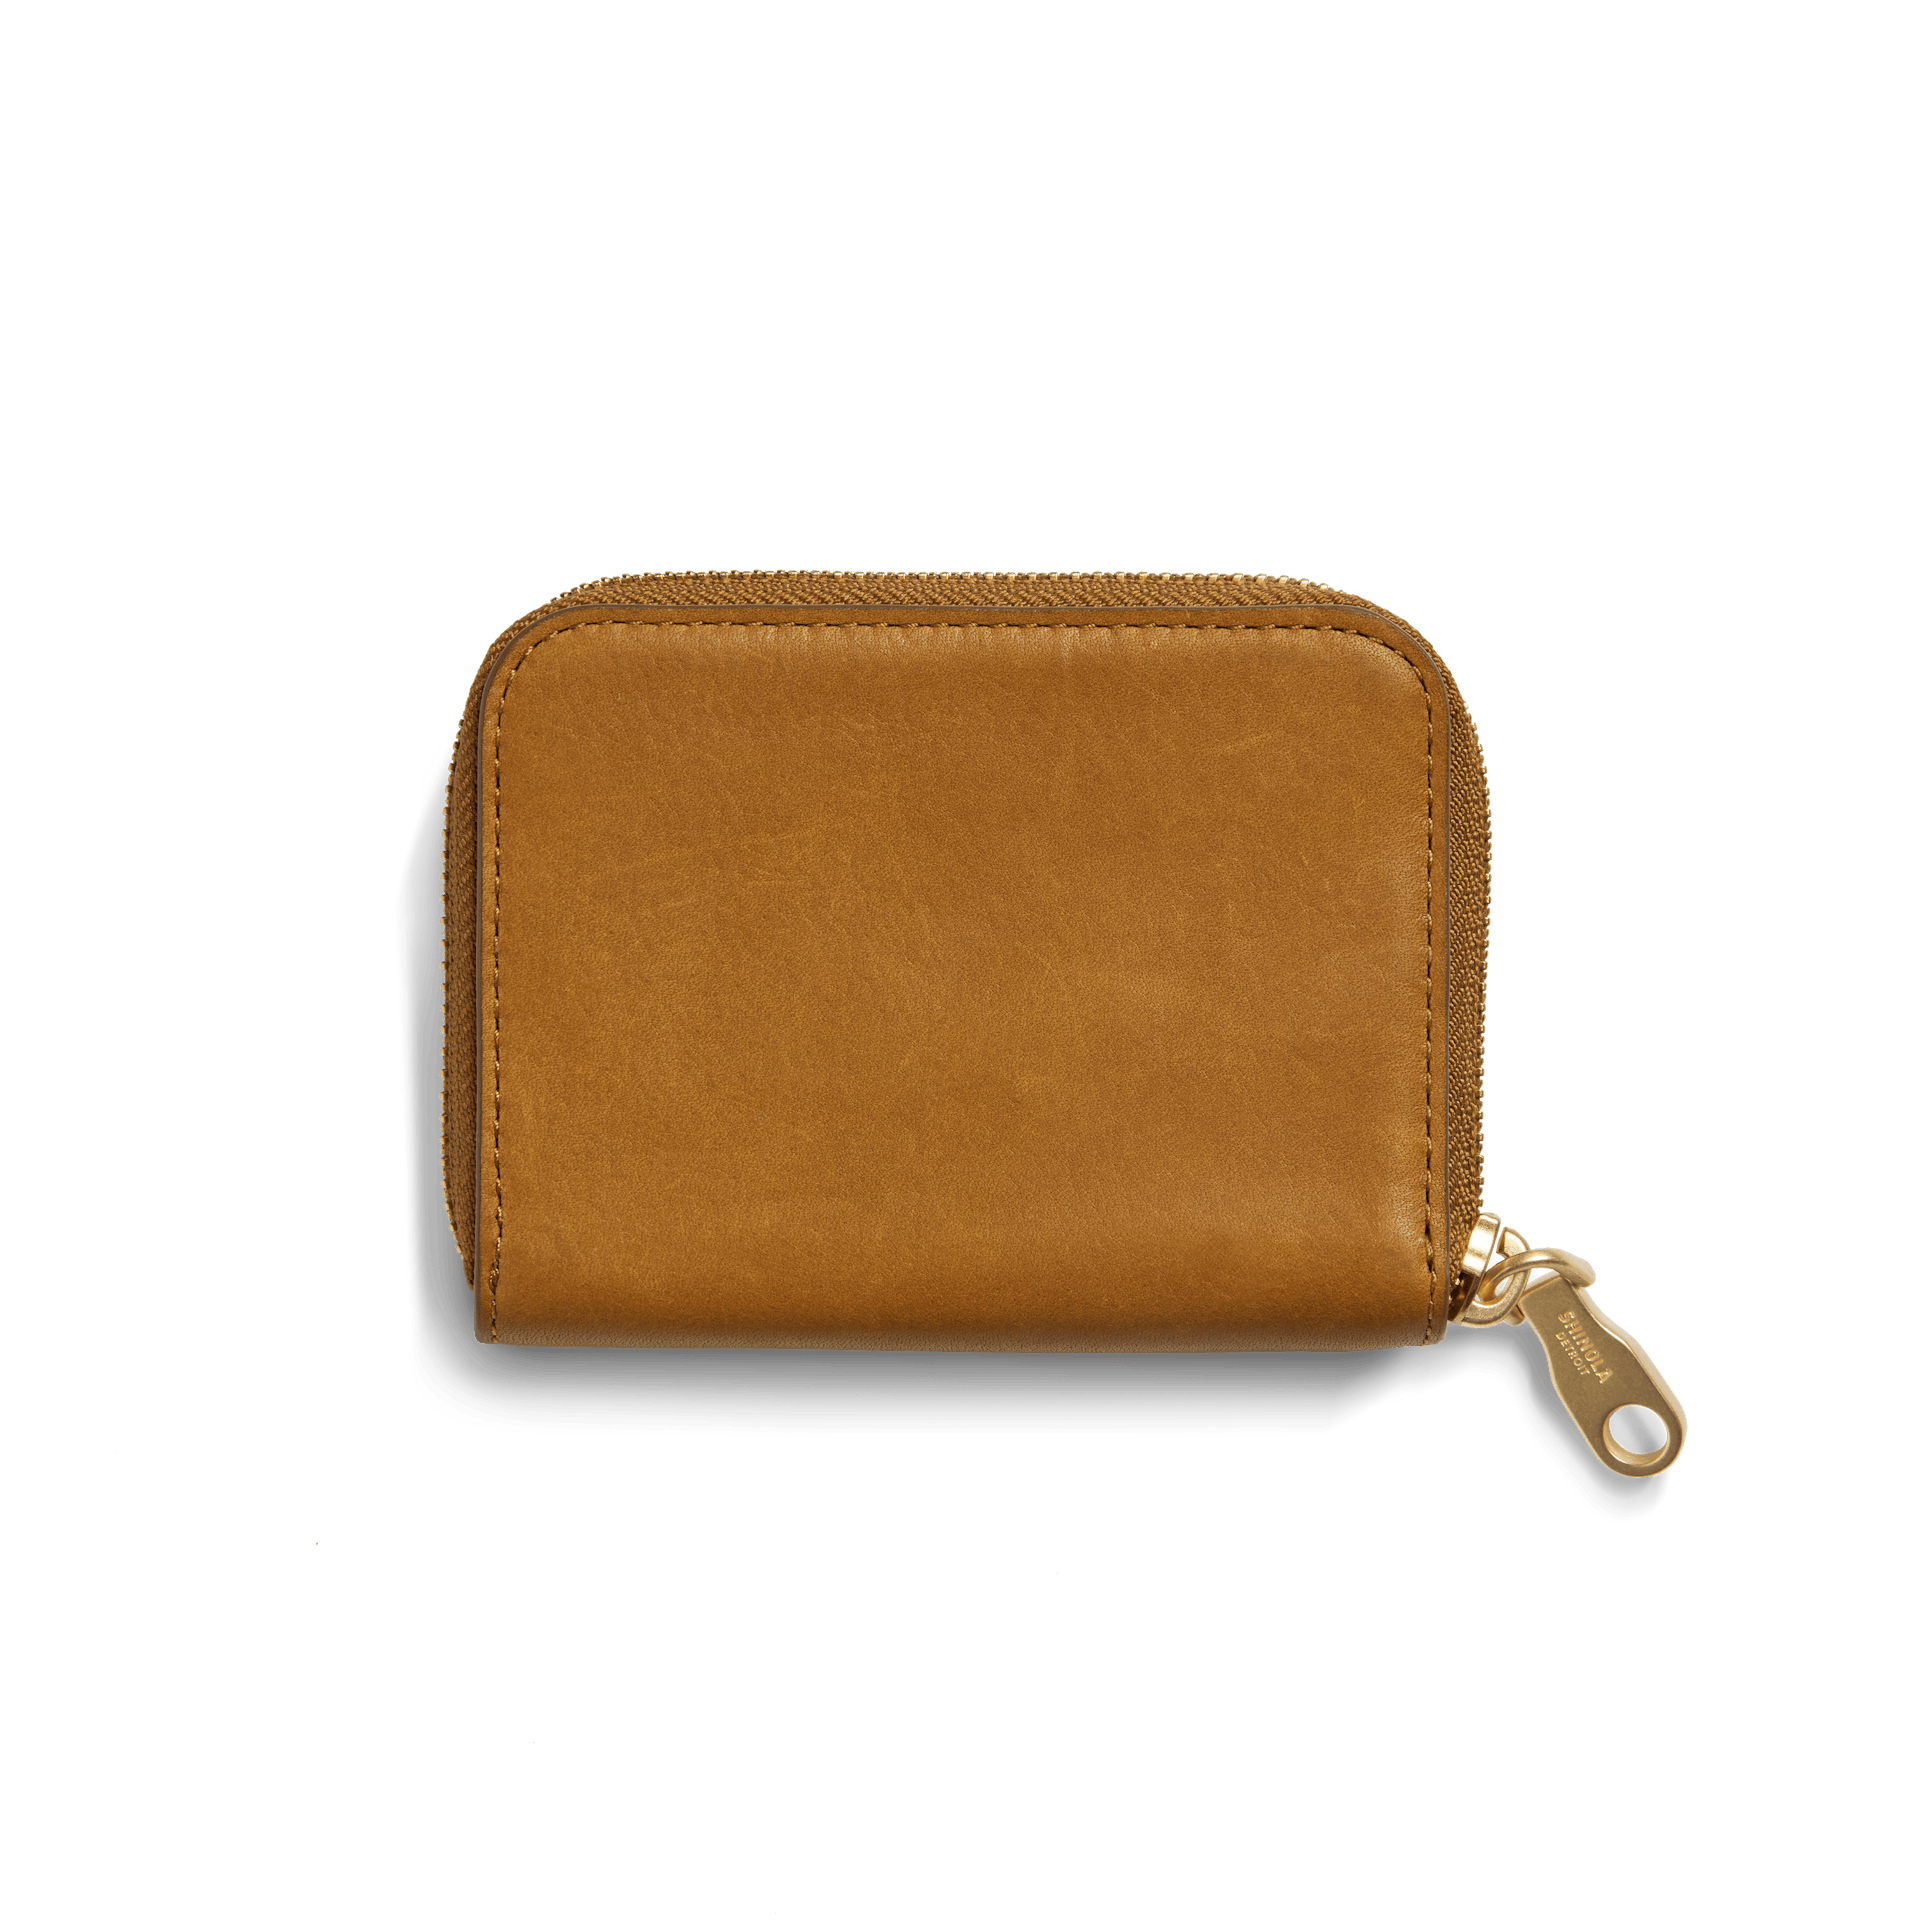 Leather Coin Purse | Small Zip Coin Purse Ivory -SINBONO